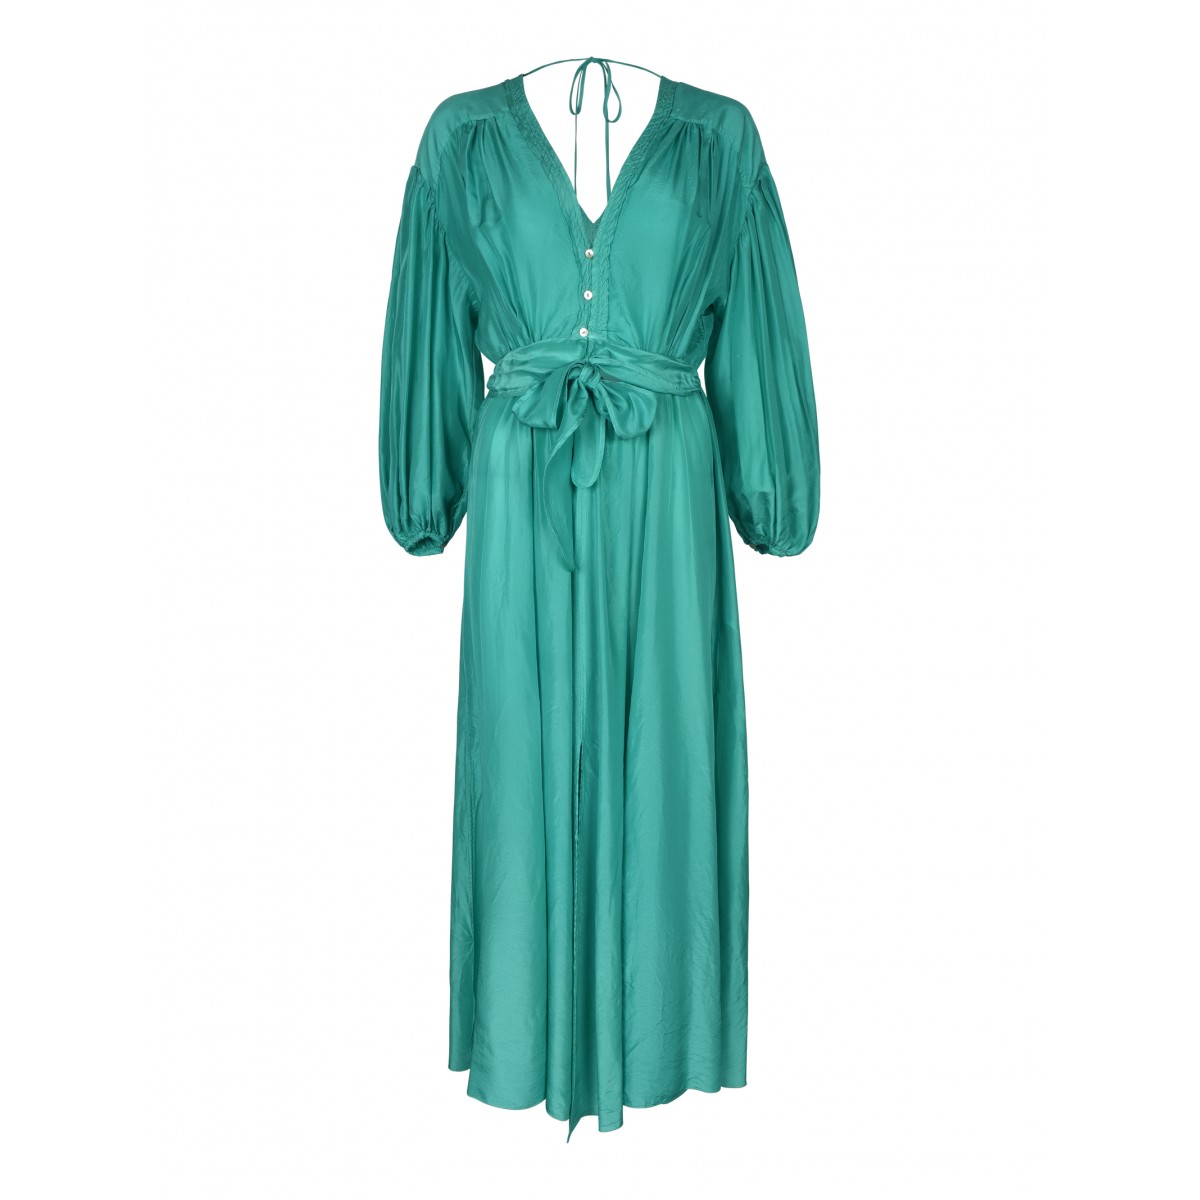 Blue long dress in cotton and silk voile